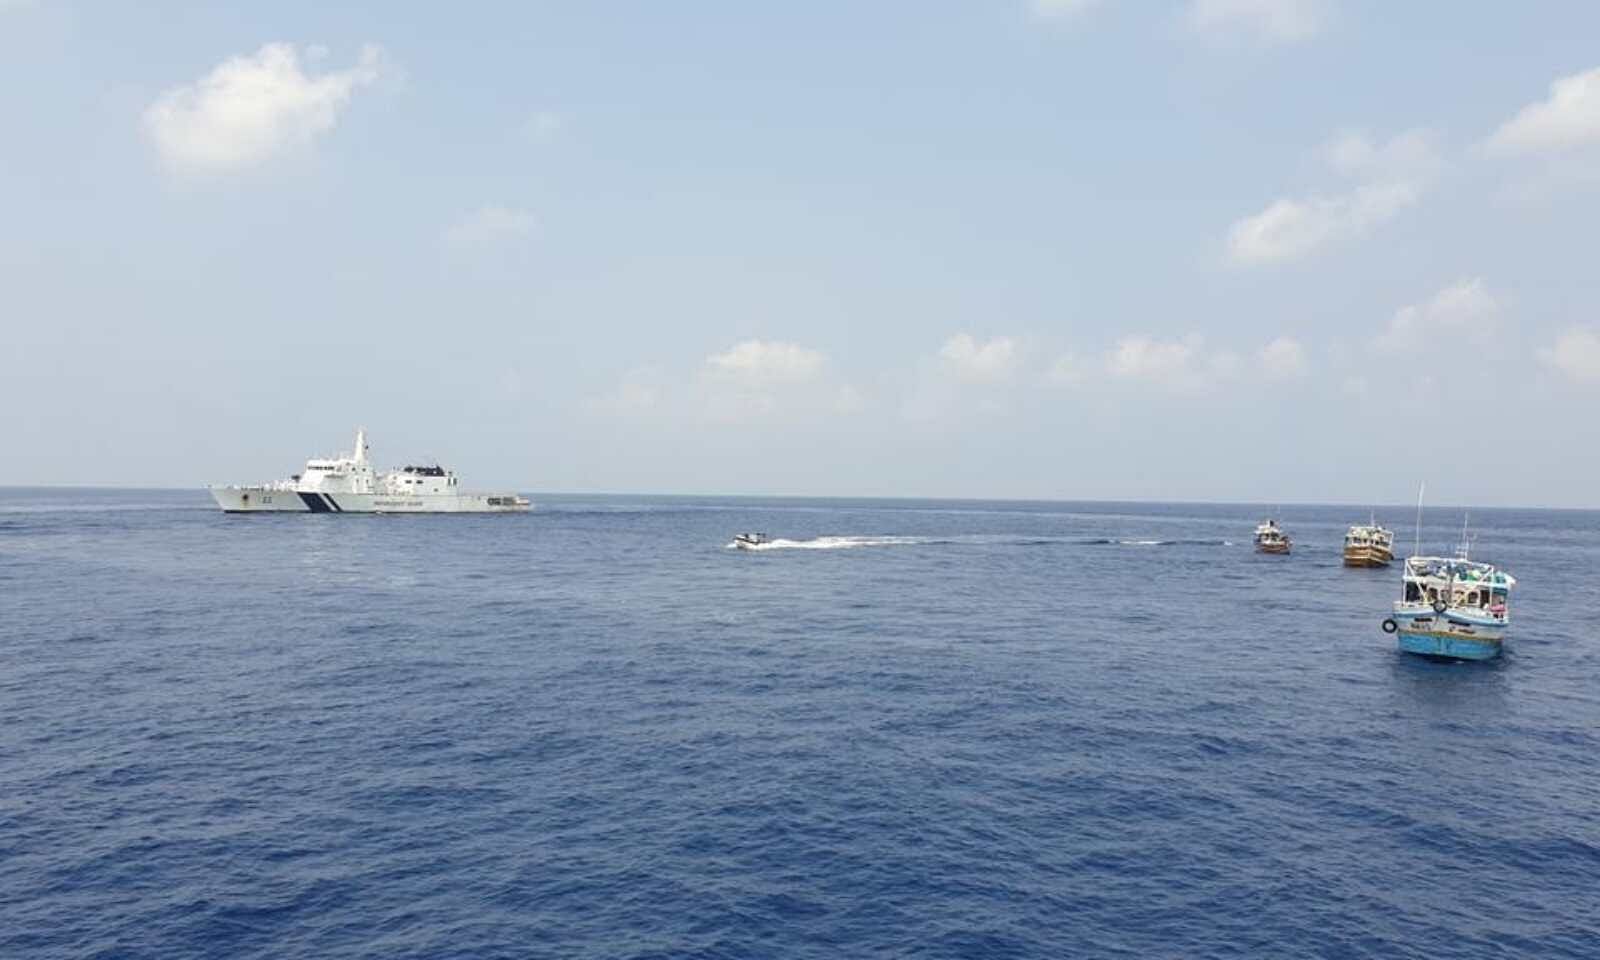 Indian Coast Guard rescues 624 passengers after fire breaks out aboard passenger ship to Lakshadweep islands